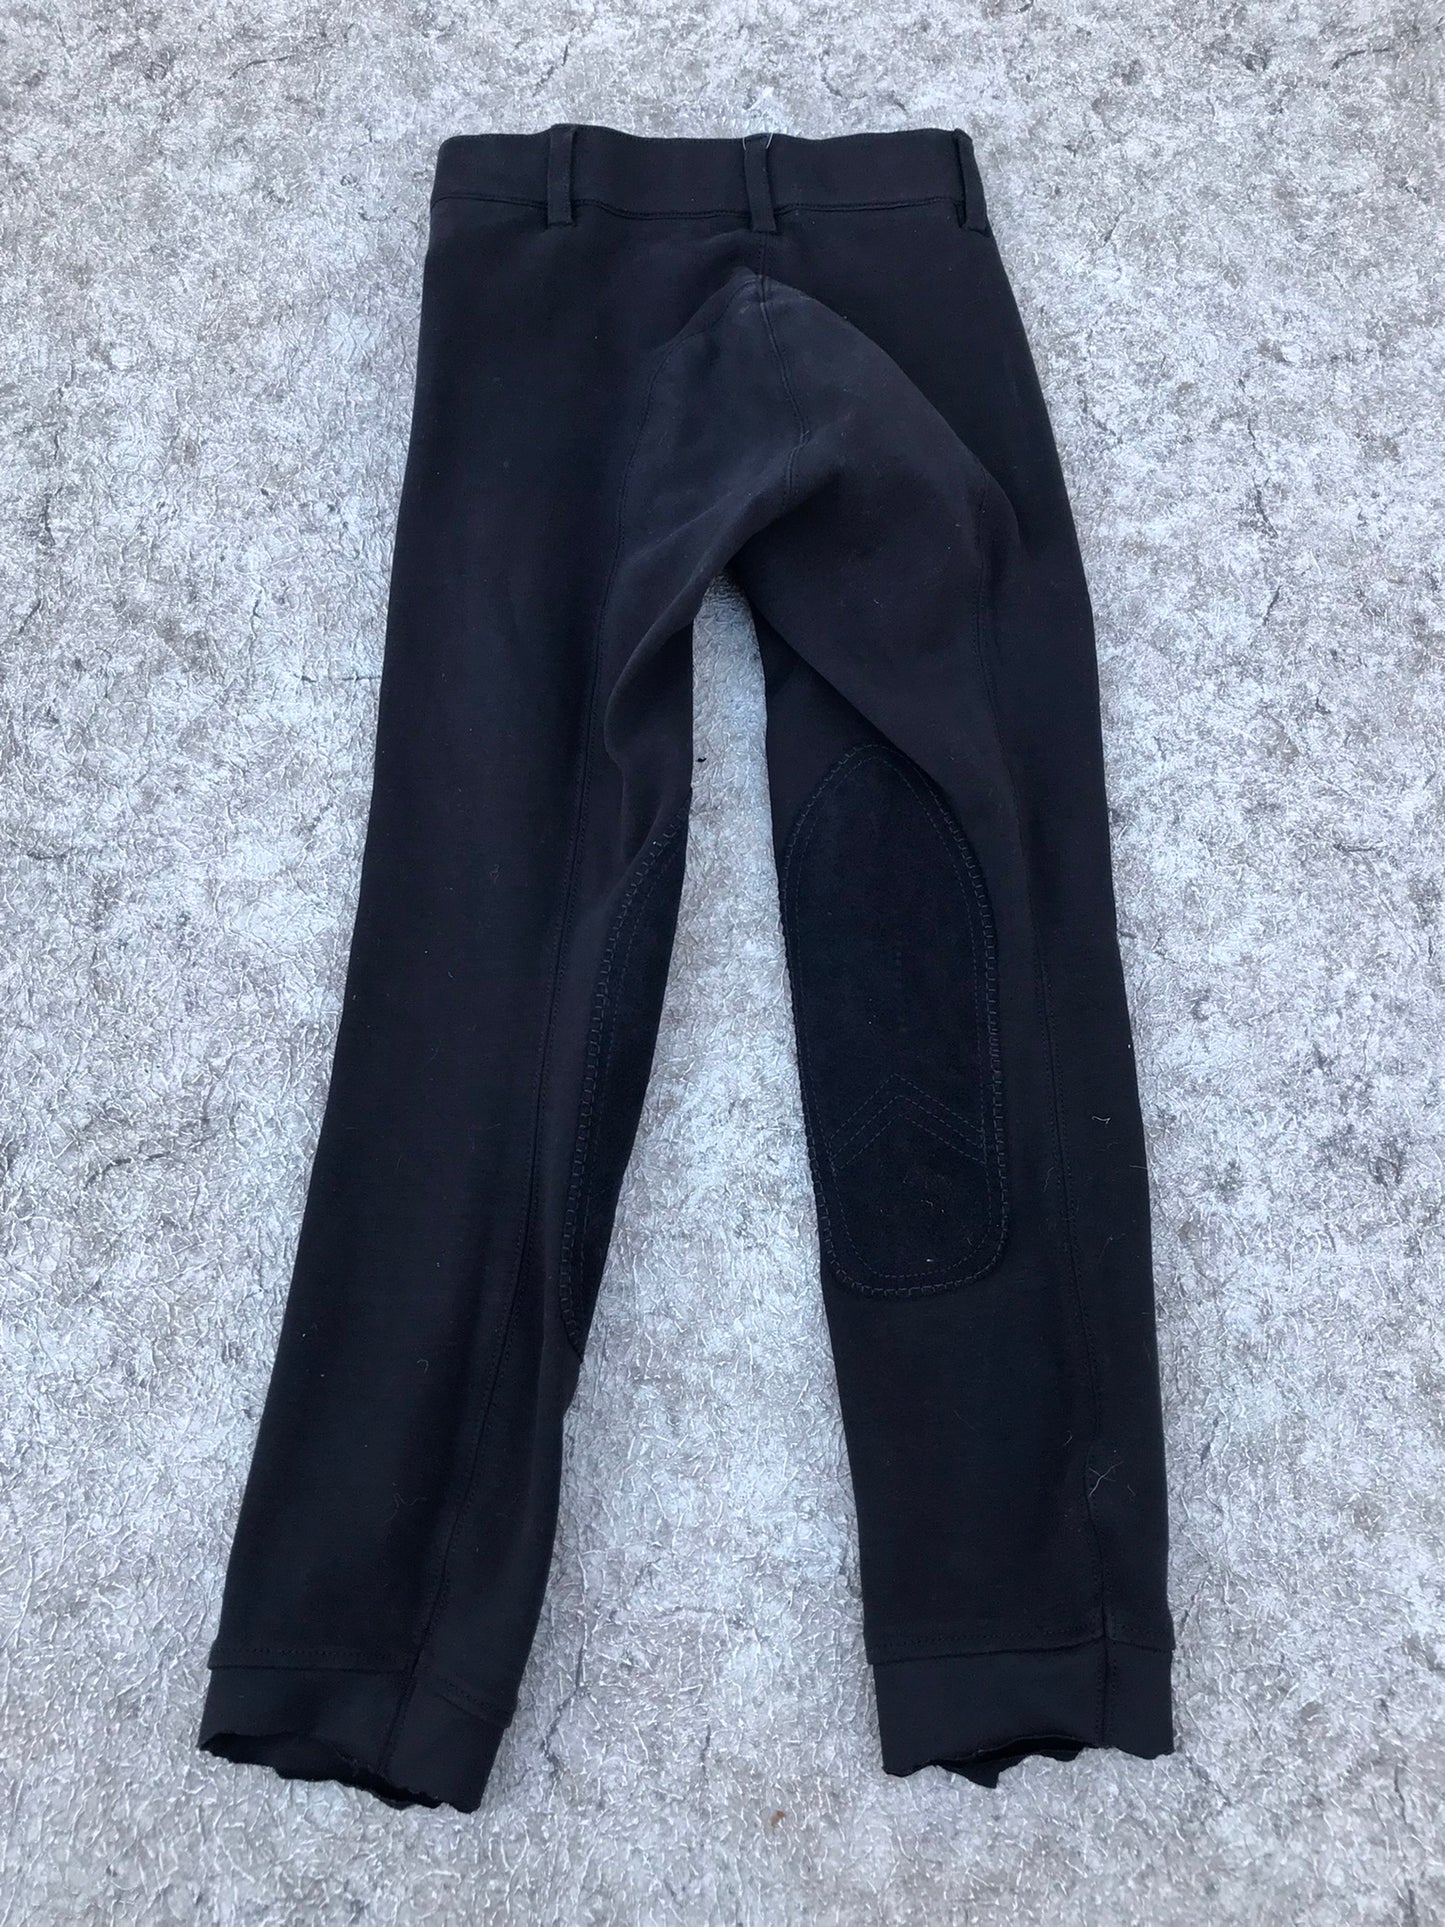 Equestrian Child Size 12 Horse Back Riding Pants Minor Wear Bottoms Cut Off